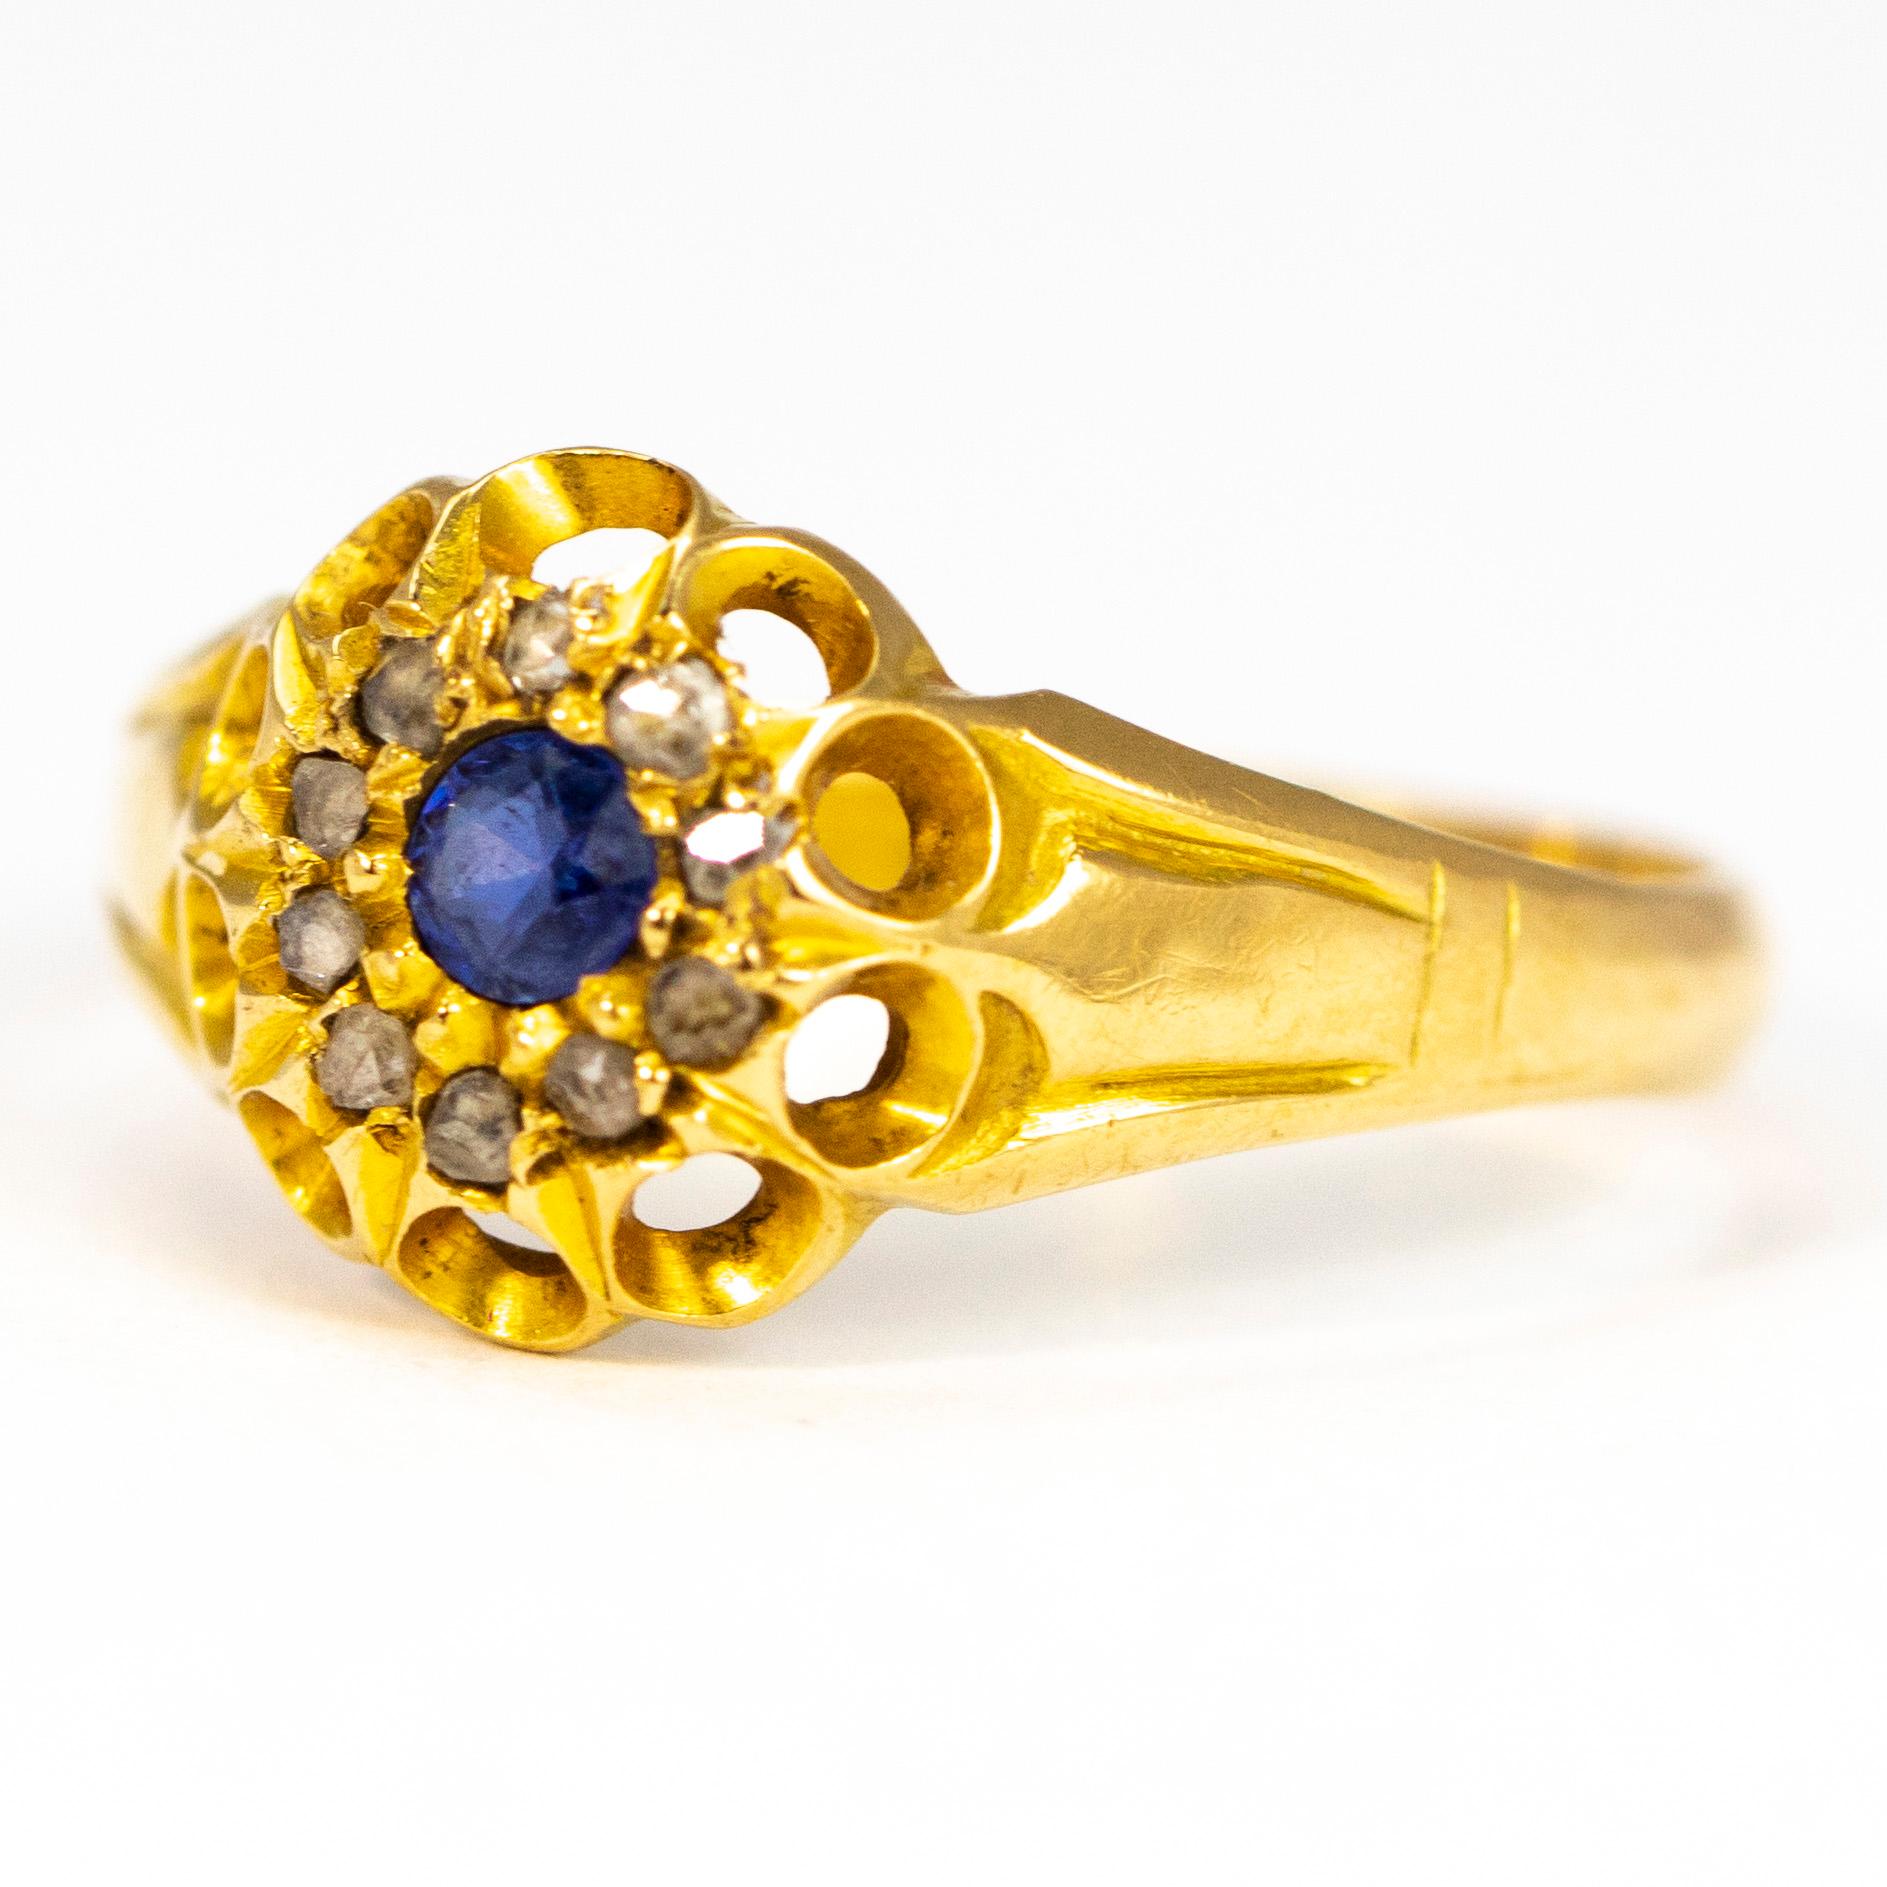 This delicate cluster ring holds a sapphire and the centre measuring 15pts and surrounding it is a halo of Diamonds measuring 2pts each. The metal work around the stones holds lovely looped detail which carries on down to chunky shoulders. 

Ring